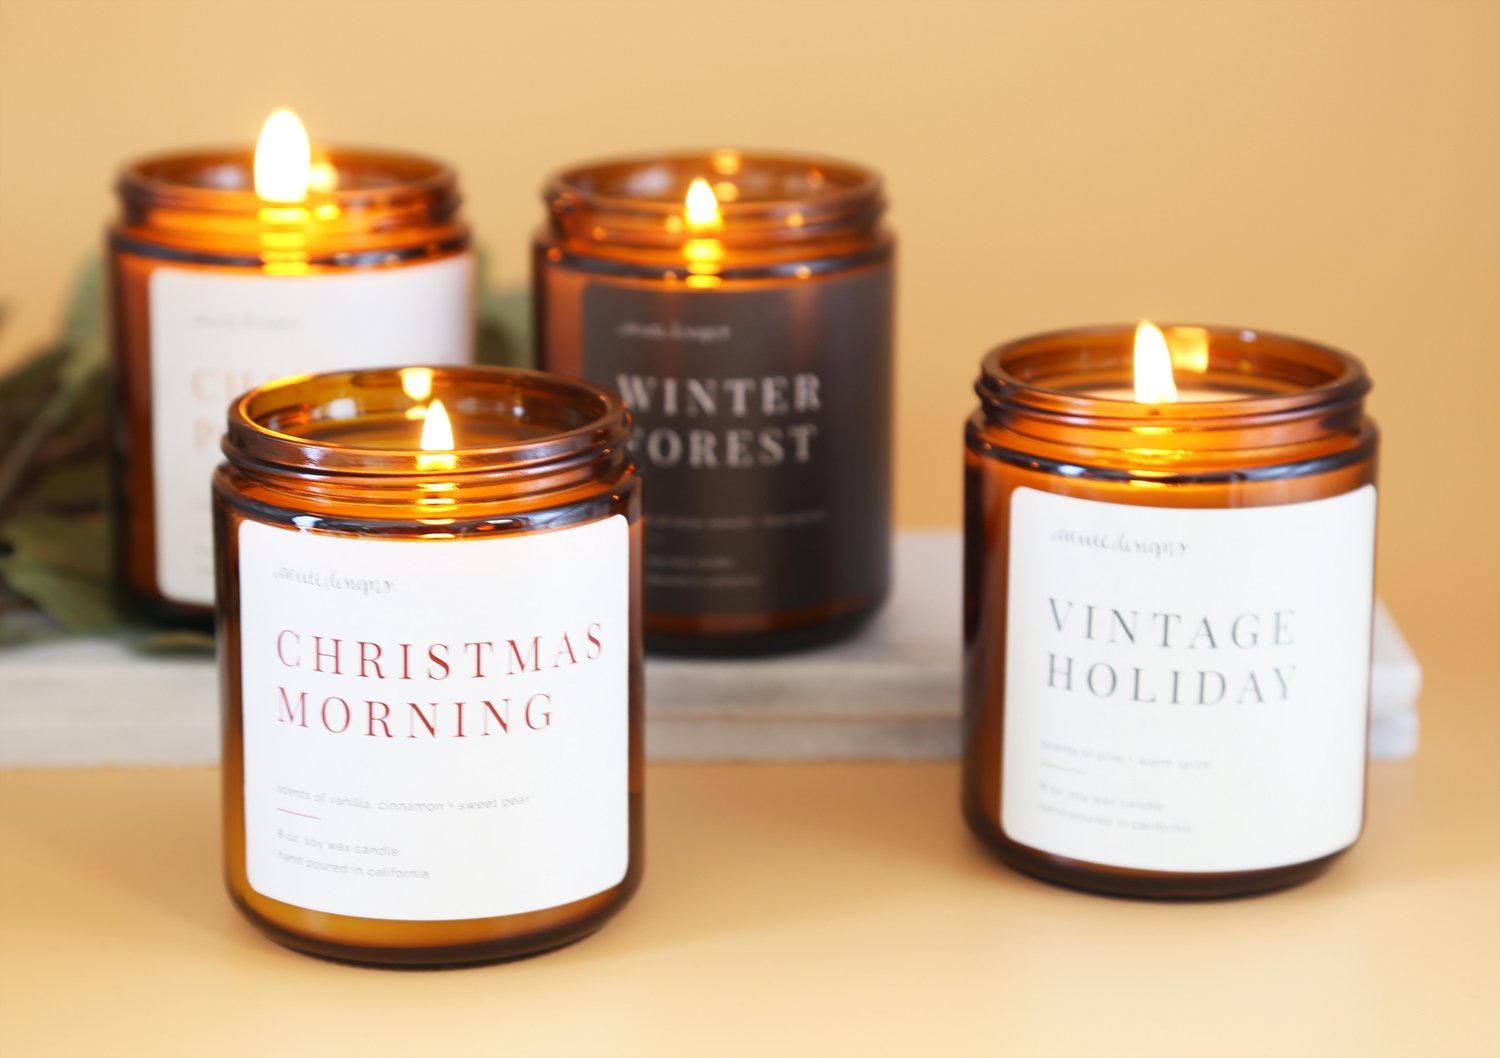 Christmas Morning Candle - Scented Holiday Candle, Scents of